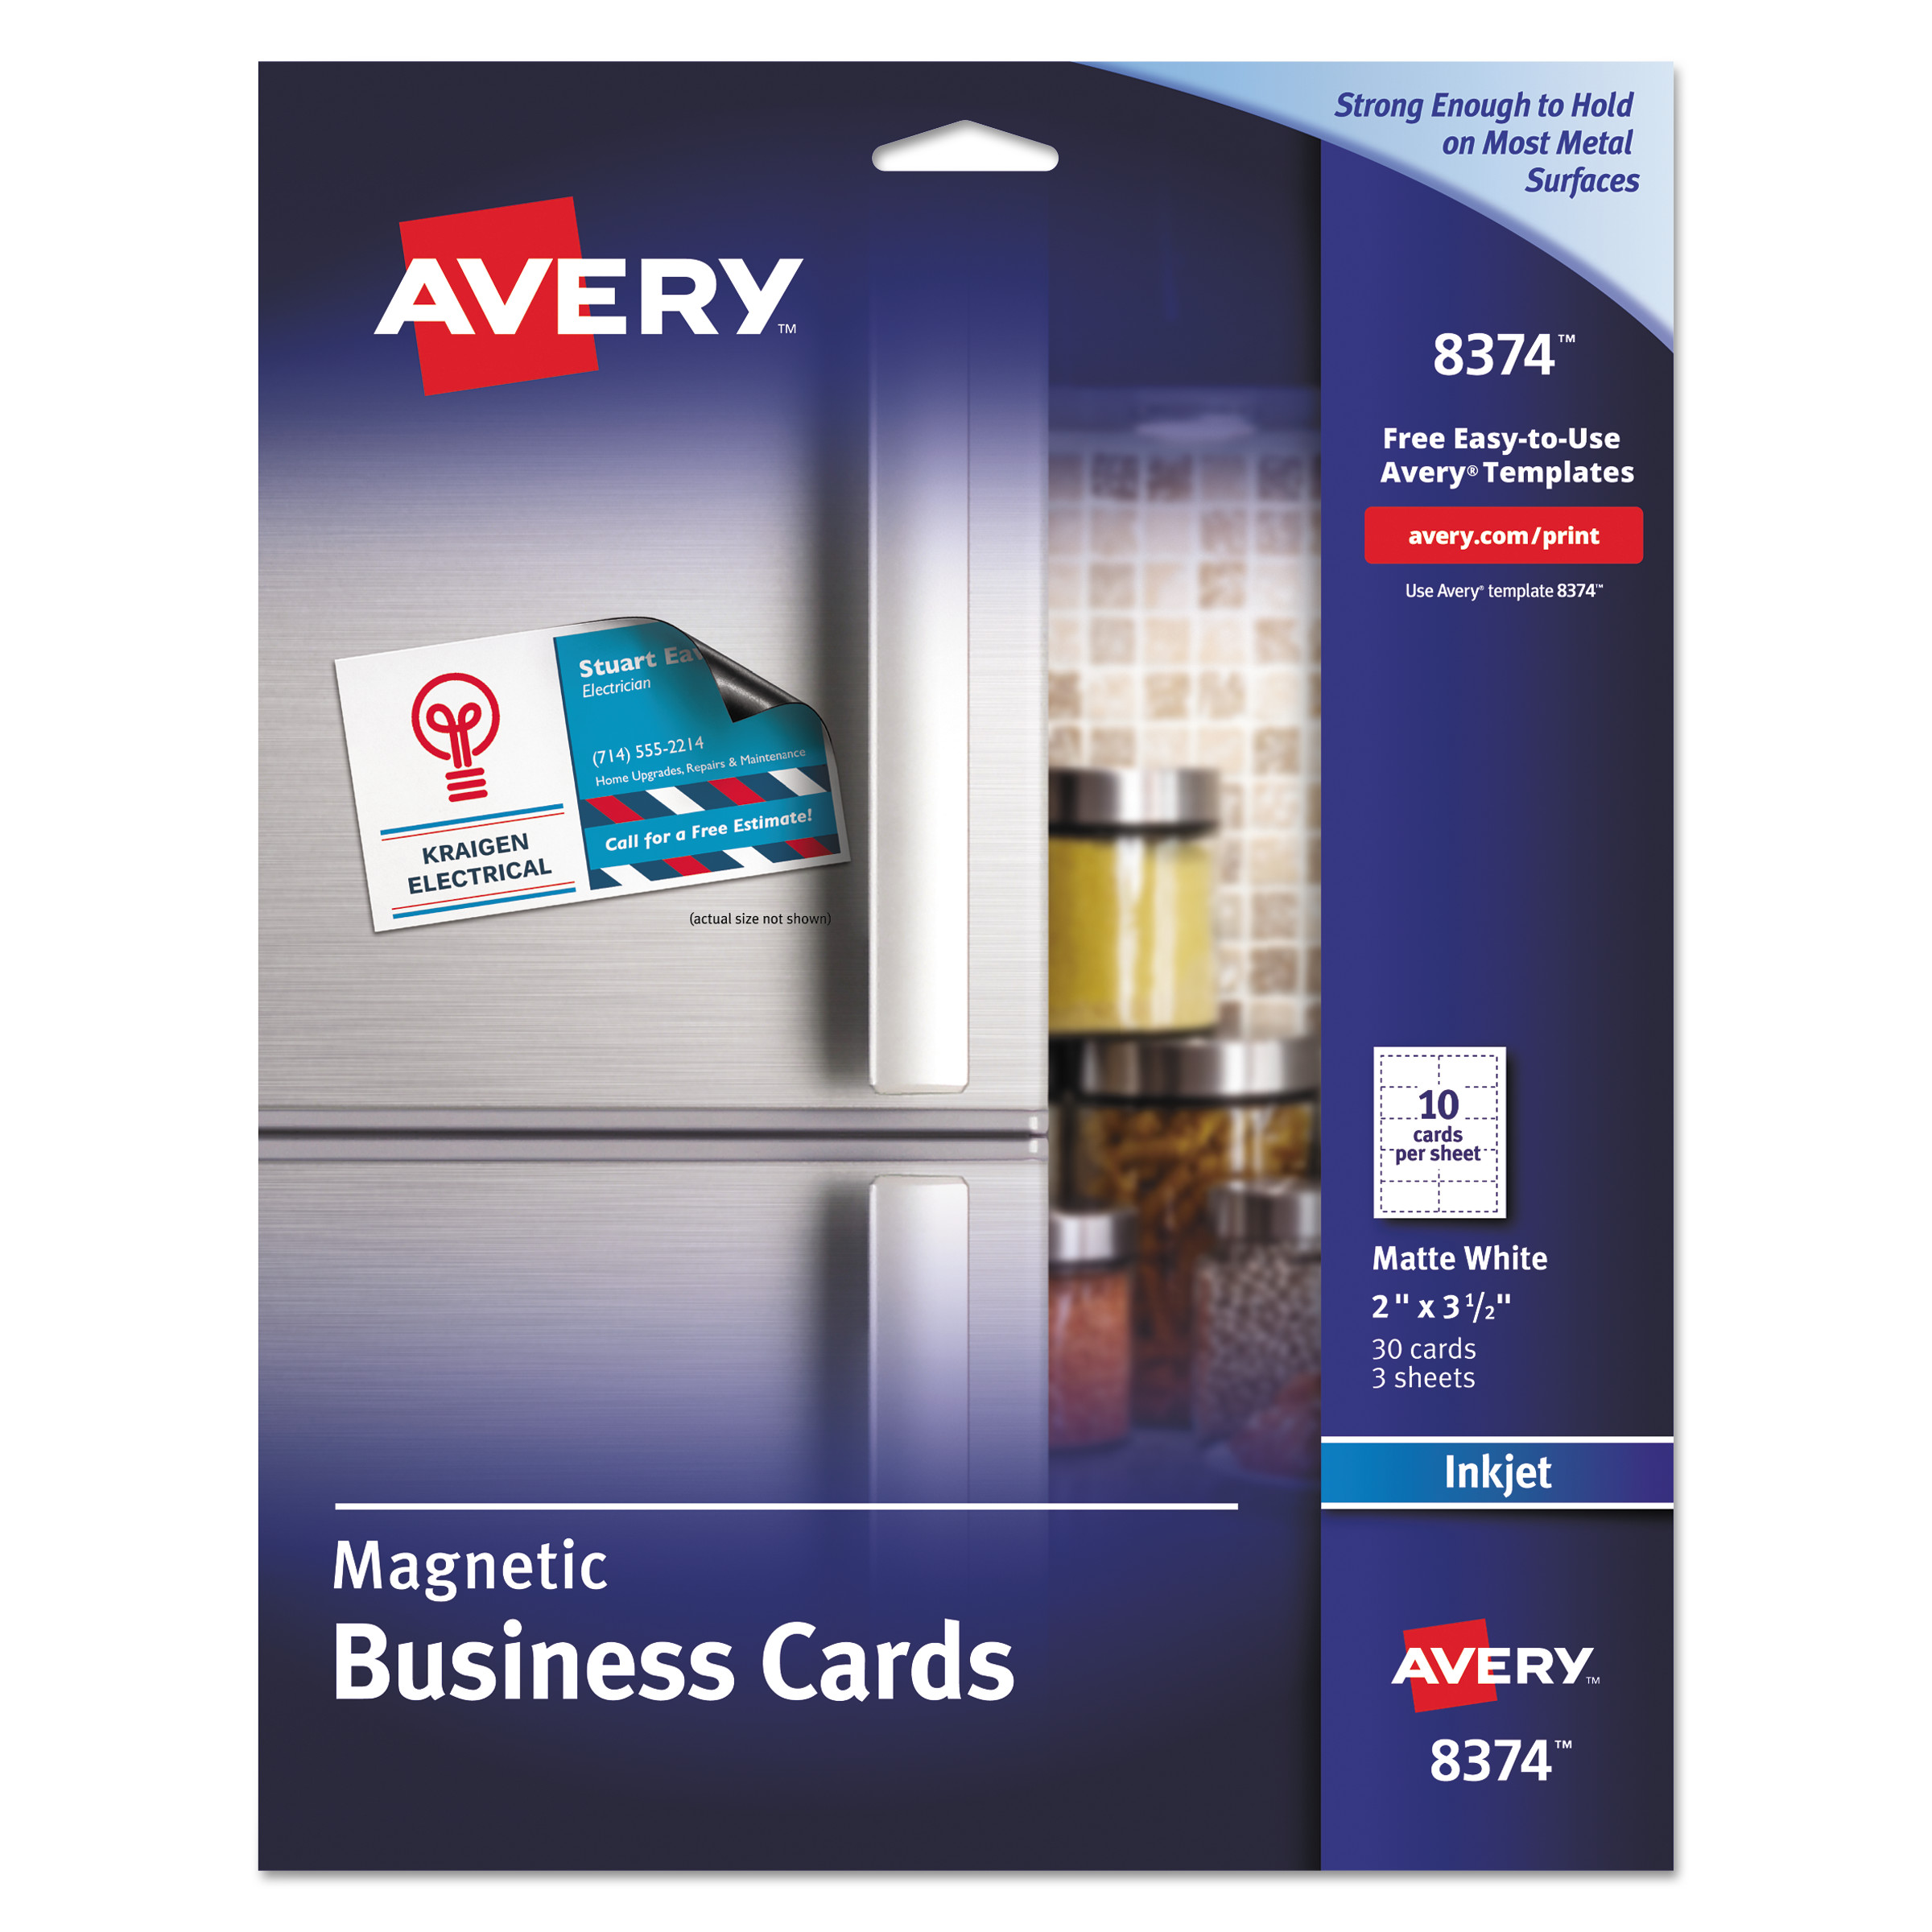  Avery 08374 Magnetic Business Cards, 2 x 3 1/2, White, 10/Sheet, 30/Pack (AVE8374) 